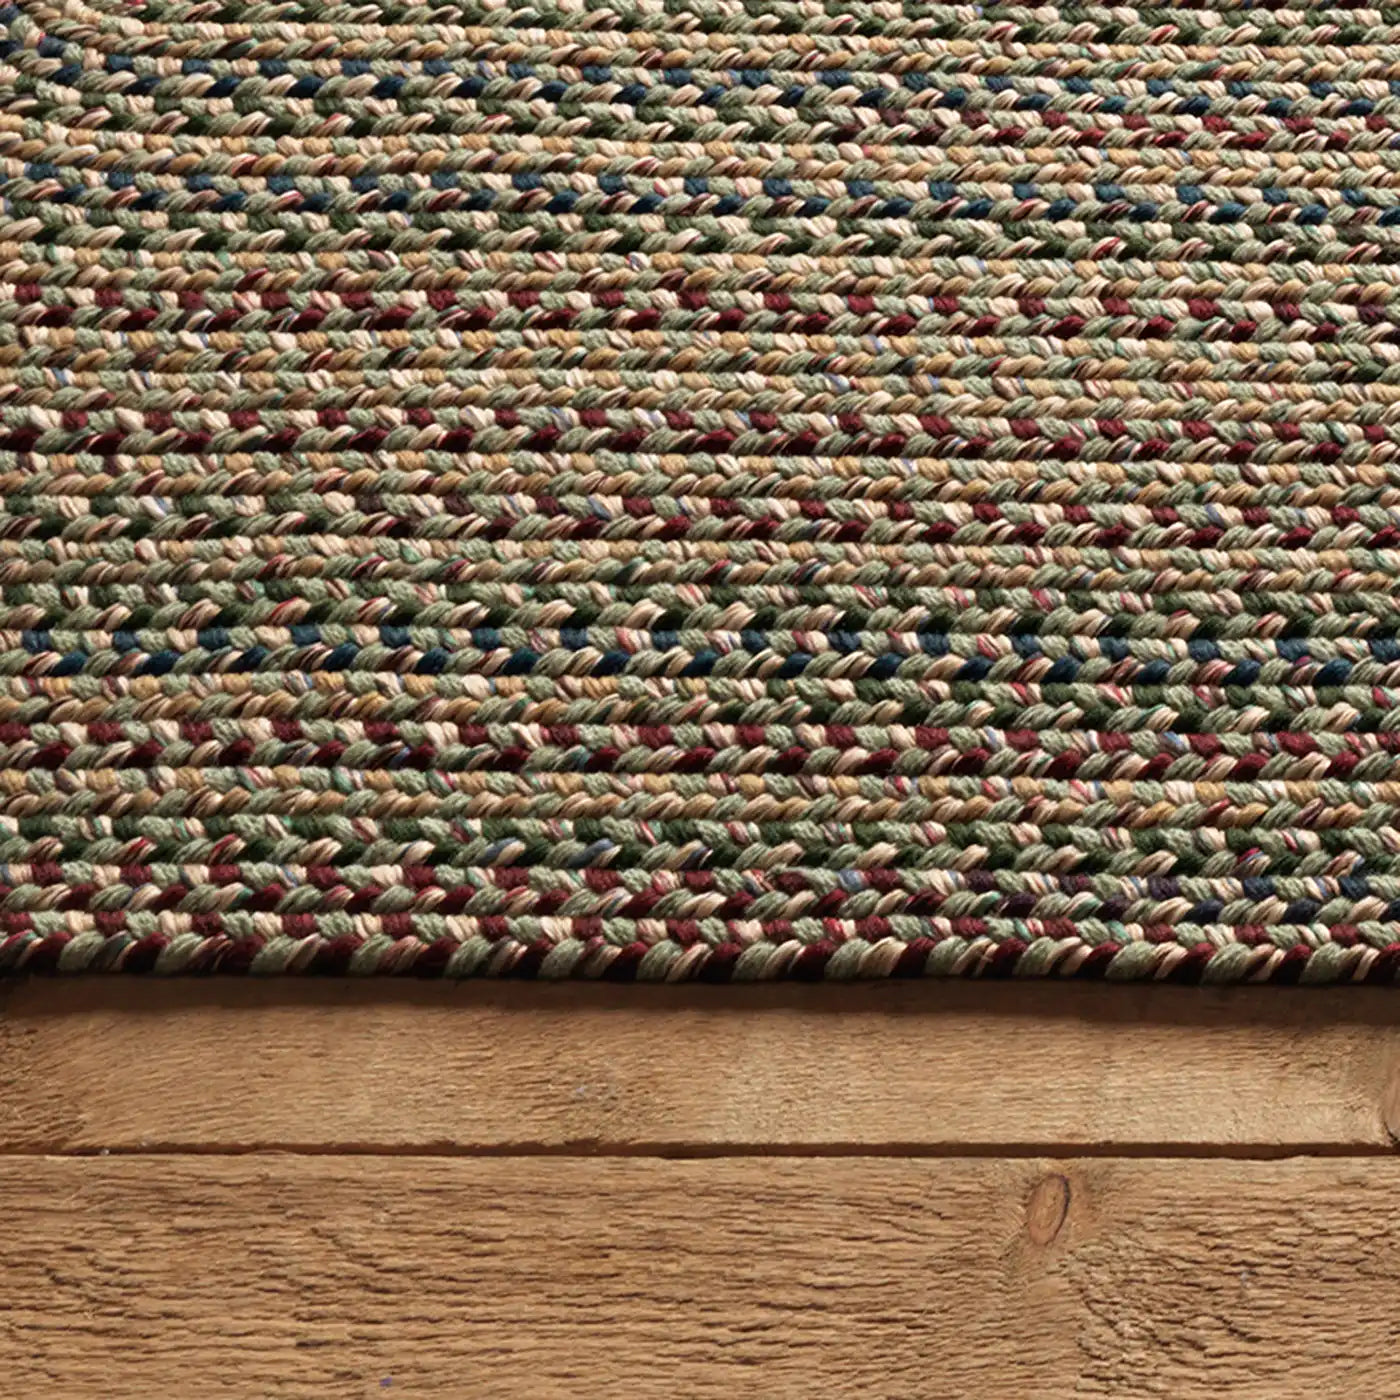 Colonial Mills Worley Red Handcraft Braided Runner Rug in Braided & Farmhouse/Rustic style.